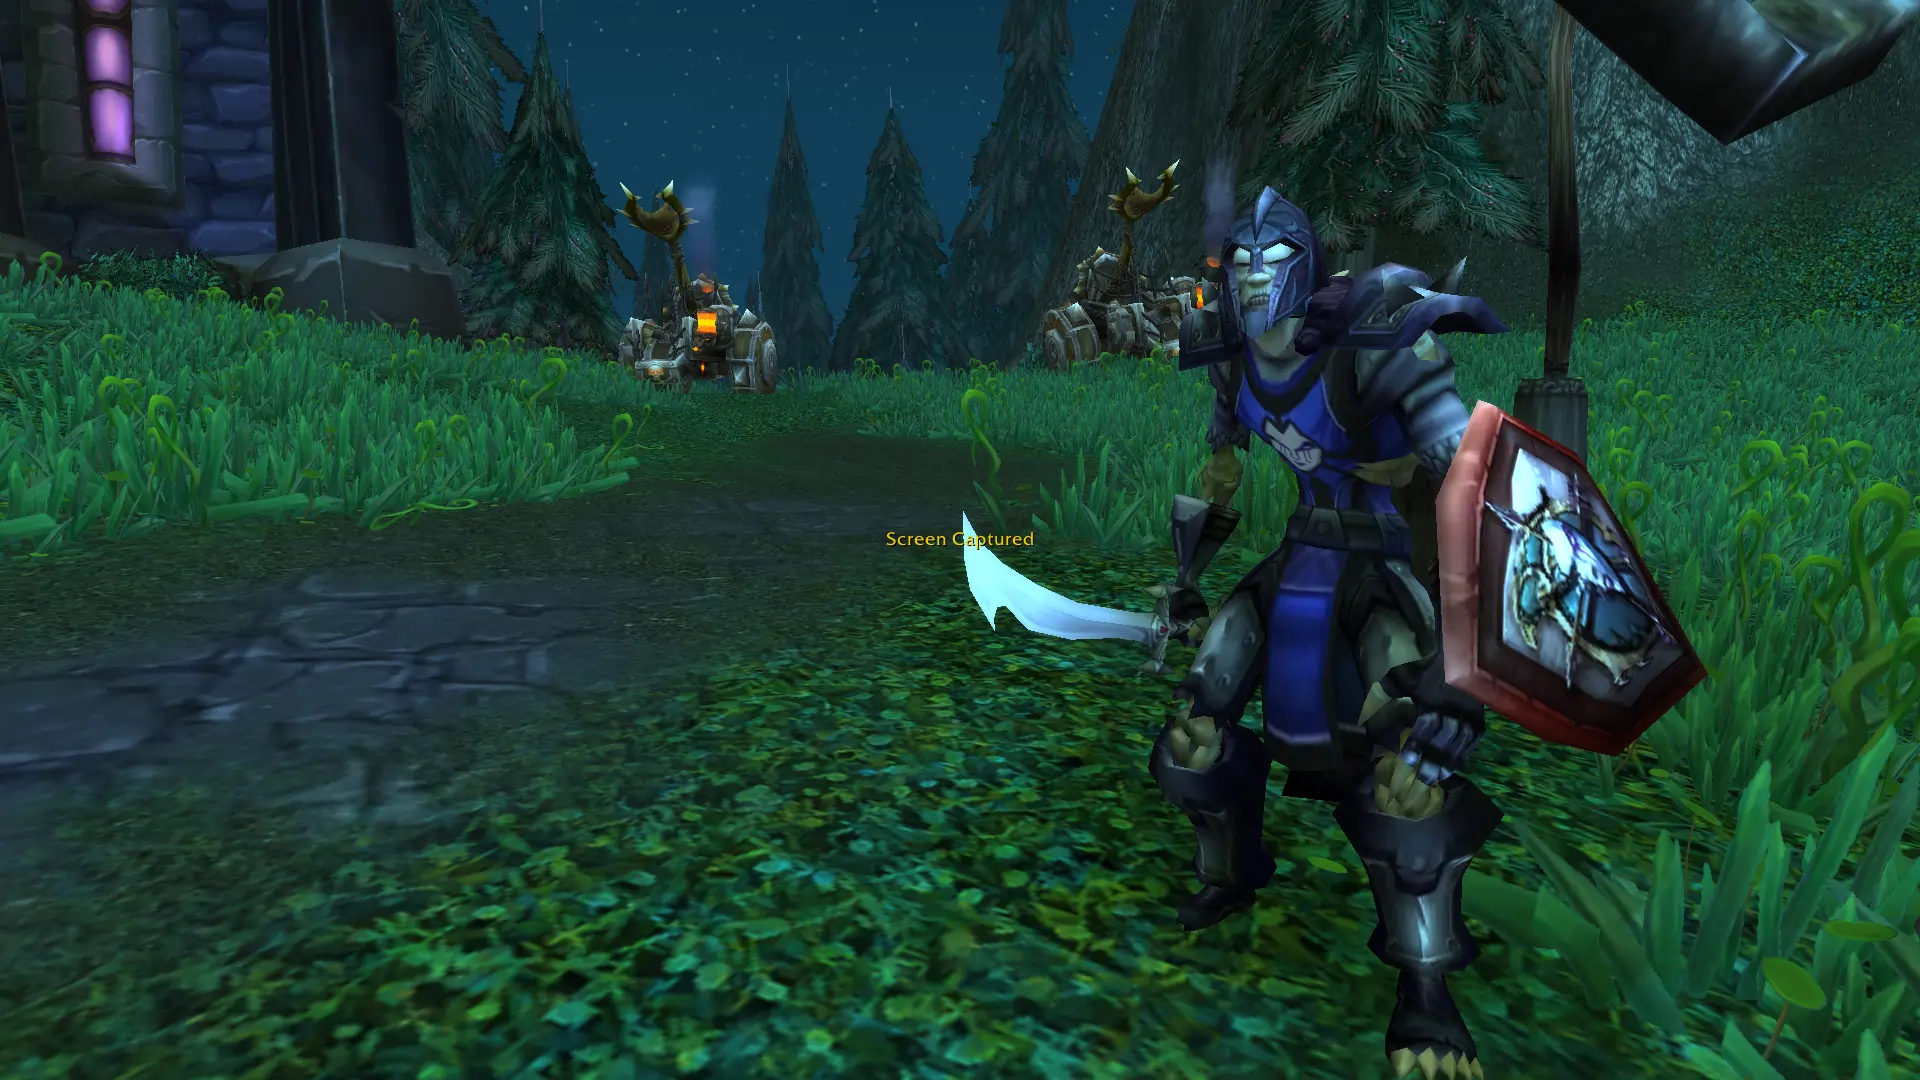 Image of World of warcraft Undead Race